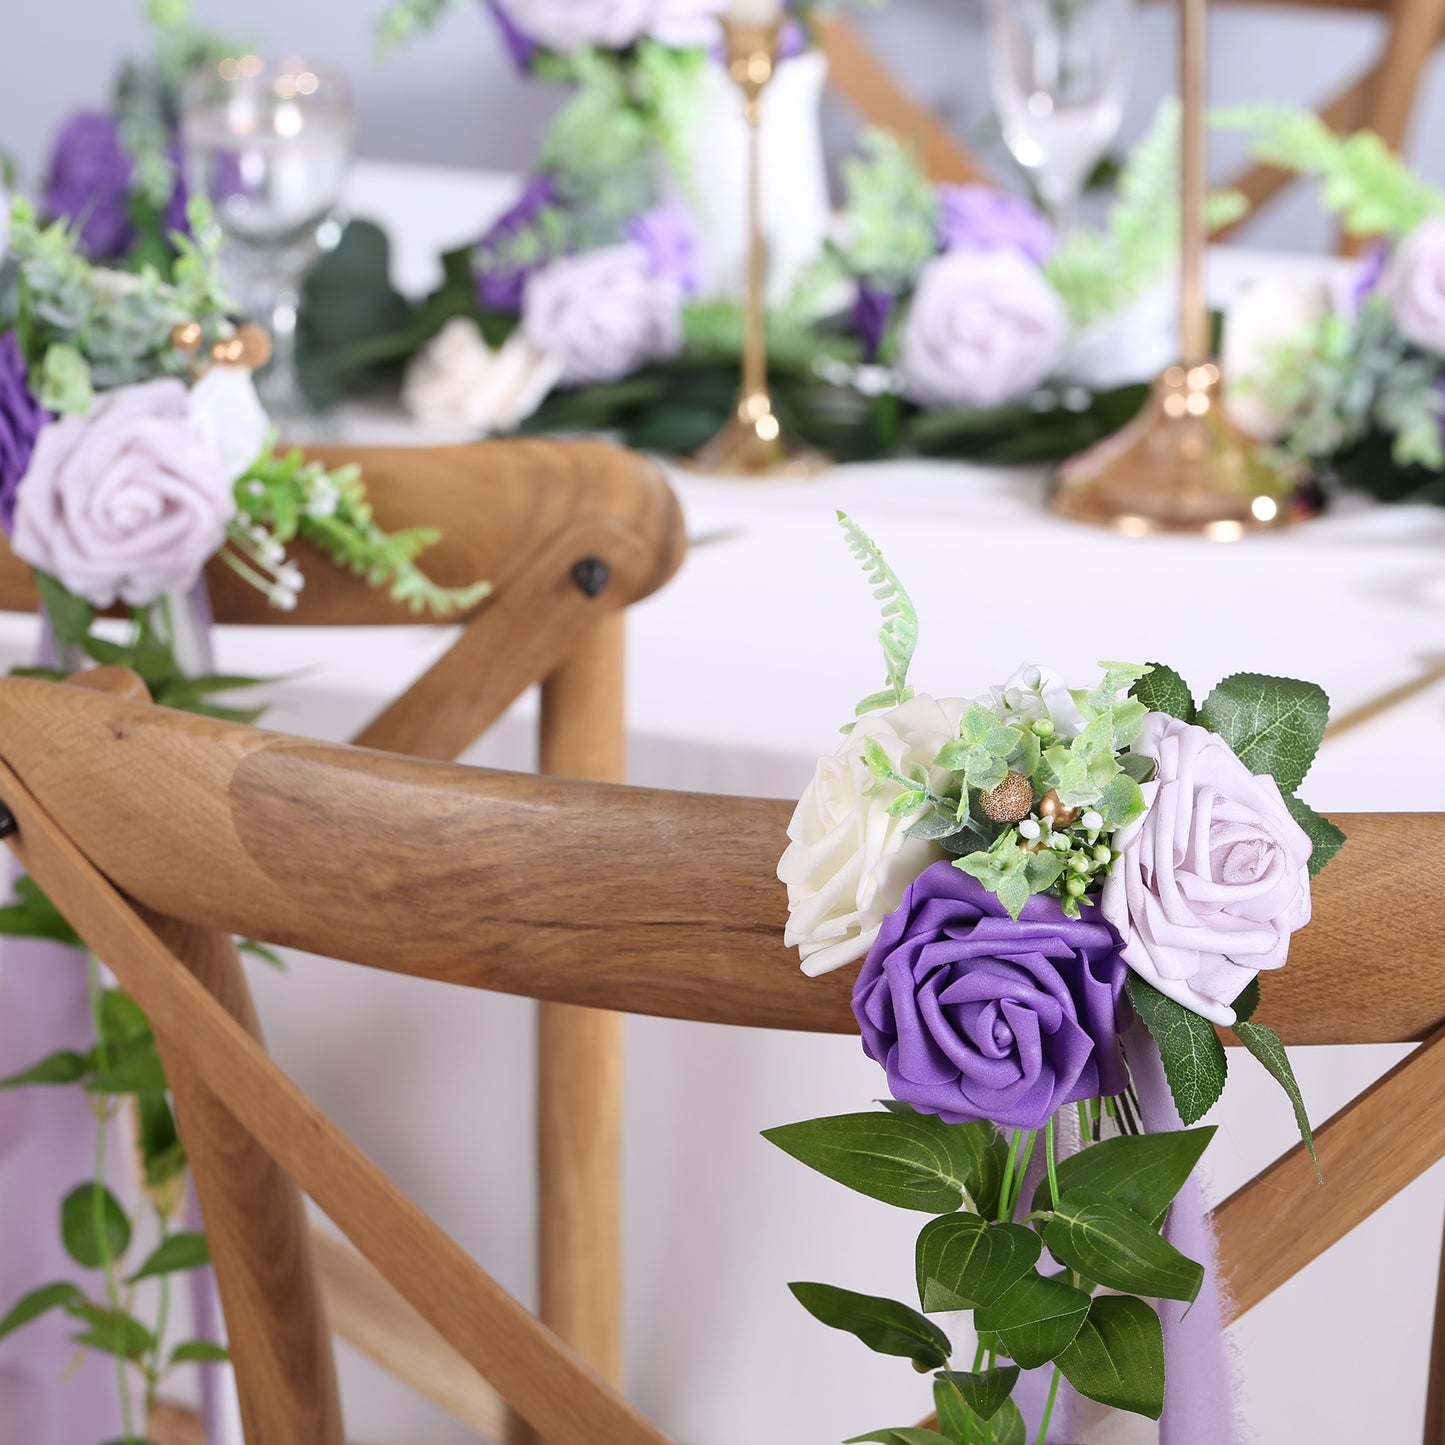 Wedding Aisle Decorations Purple Pew Flowers Set of 10 for Wedding Ceremony Party Chair Decor with Artificial Flowers Eucalyptus and Ribbons